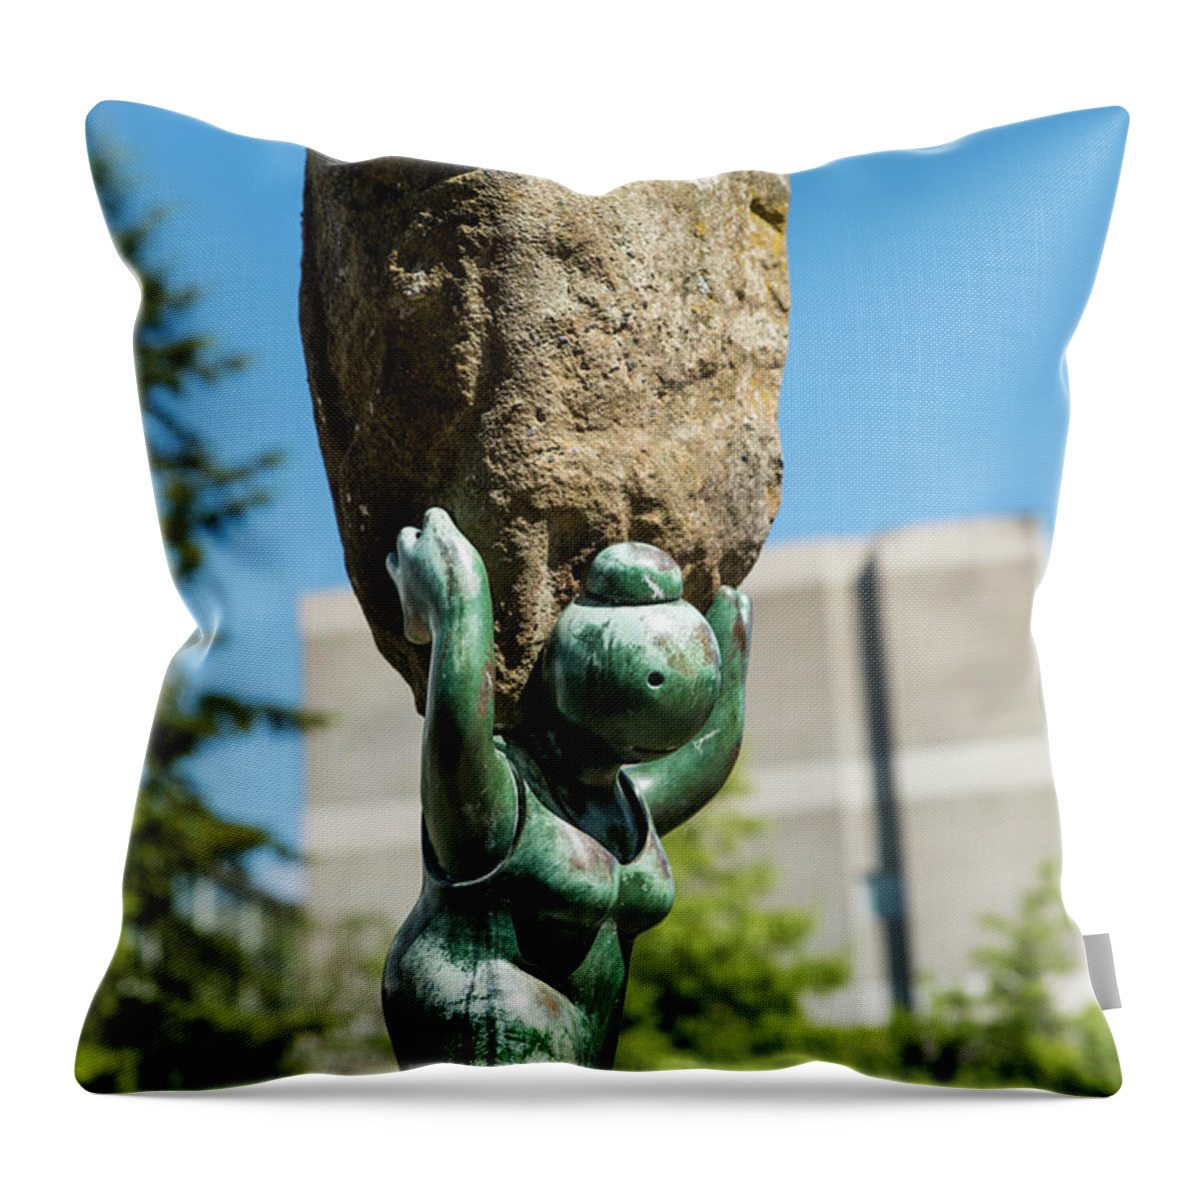 Sculpture Throw Pillow featuring the photograph A Load of Homework by Tom Cochran